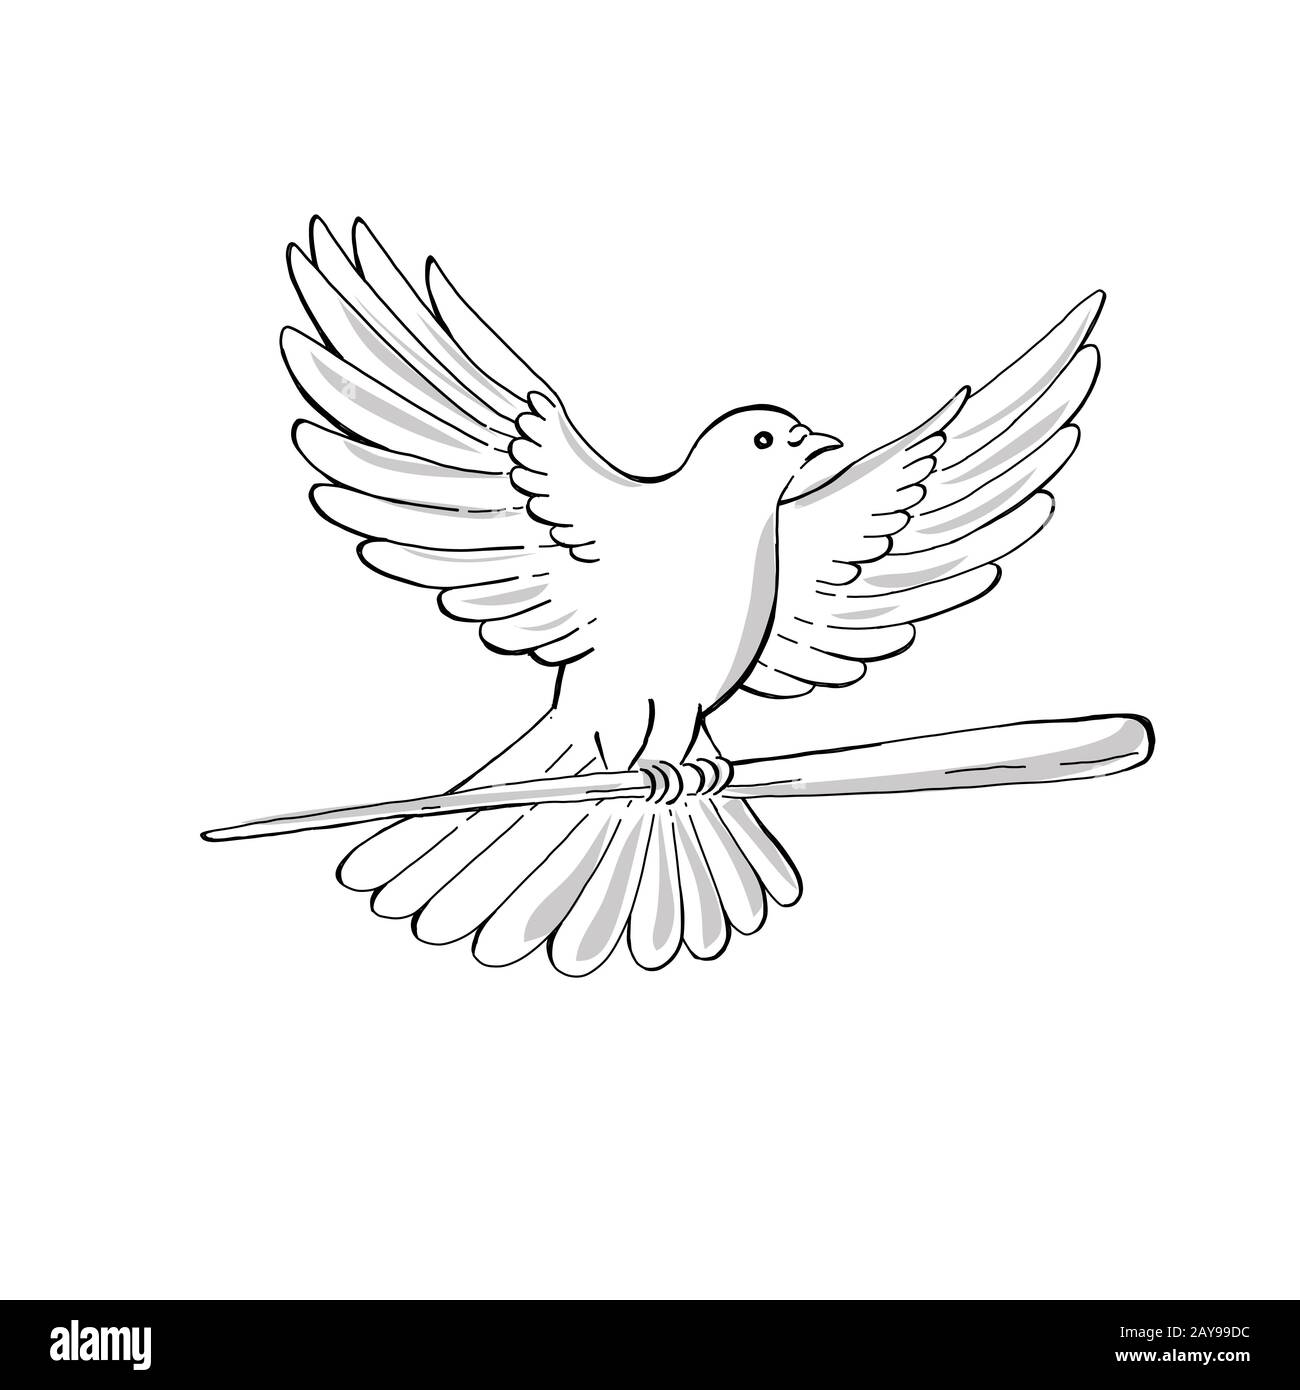 Free Vector | Hand drawn flying pigeon against white background vector  illustration